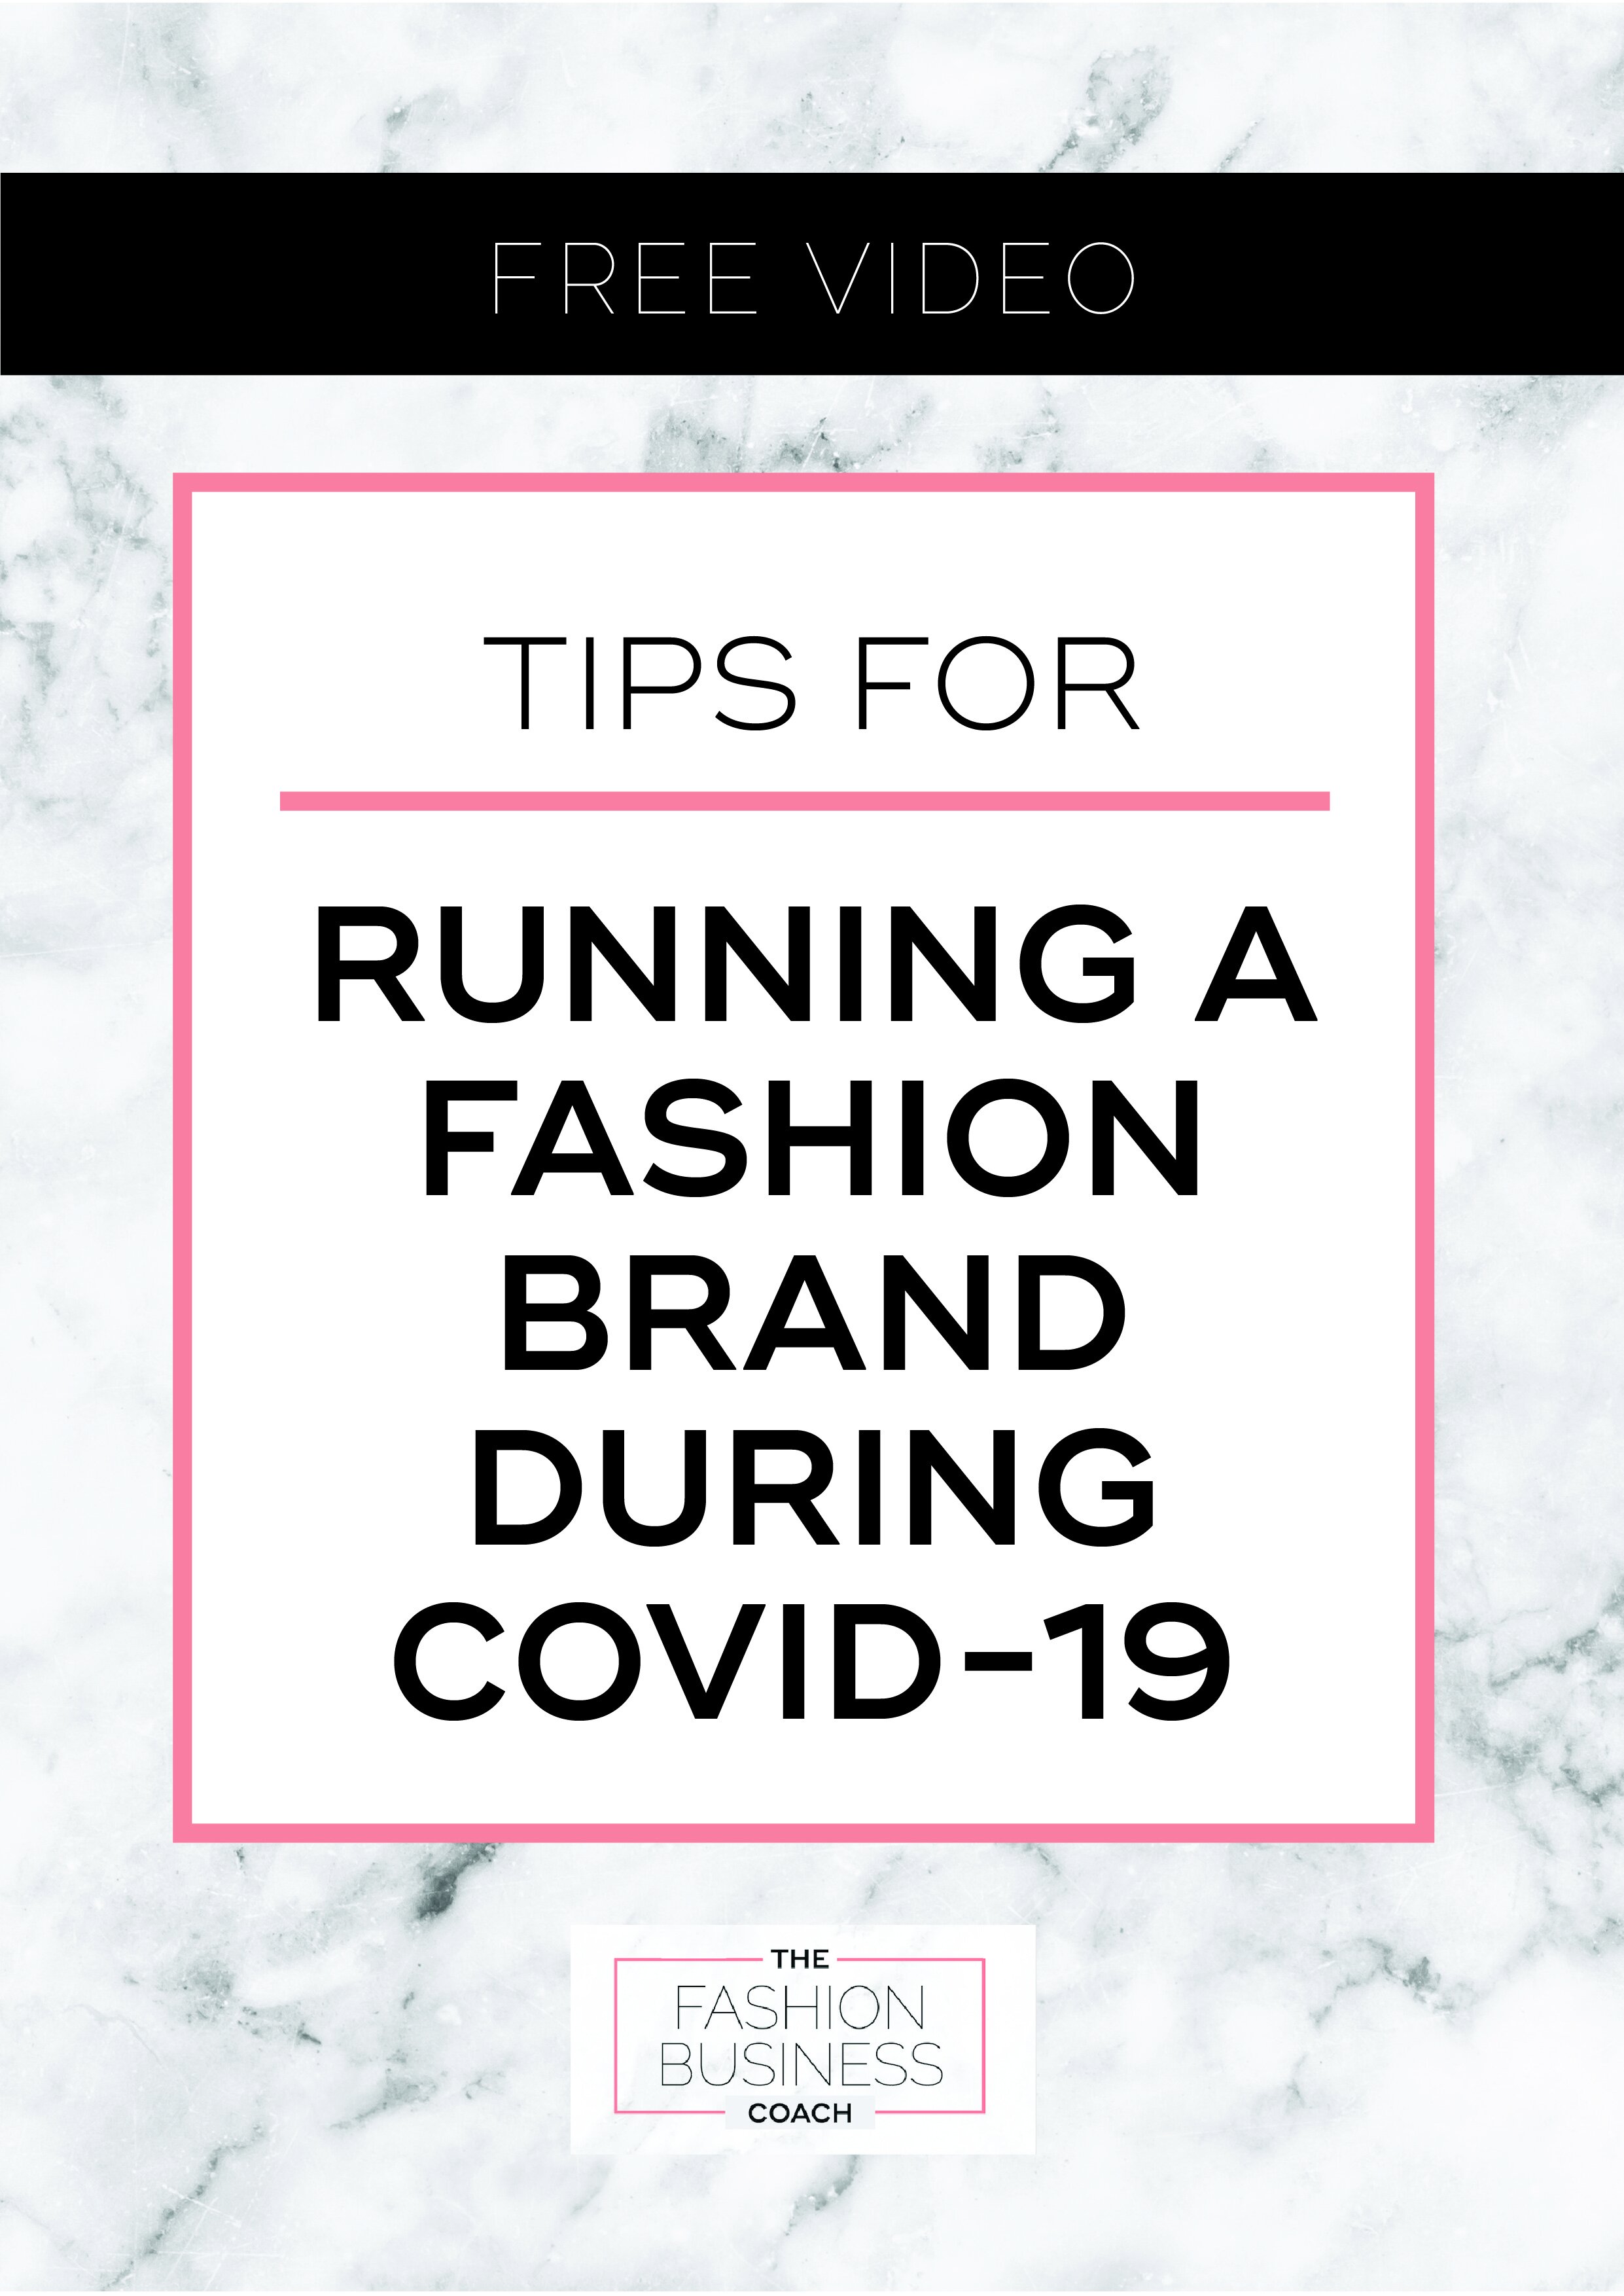 Tips for Running a Fashion Brand During Covid-19  Free Video 1.jpg